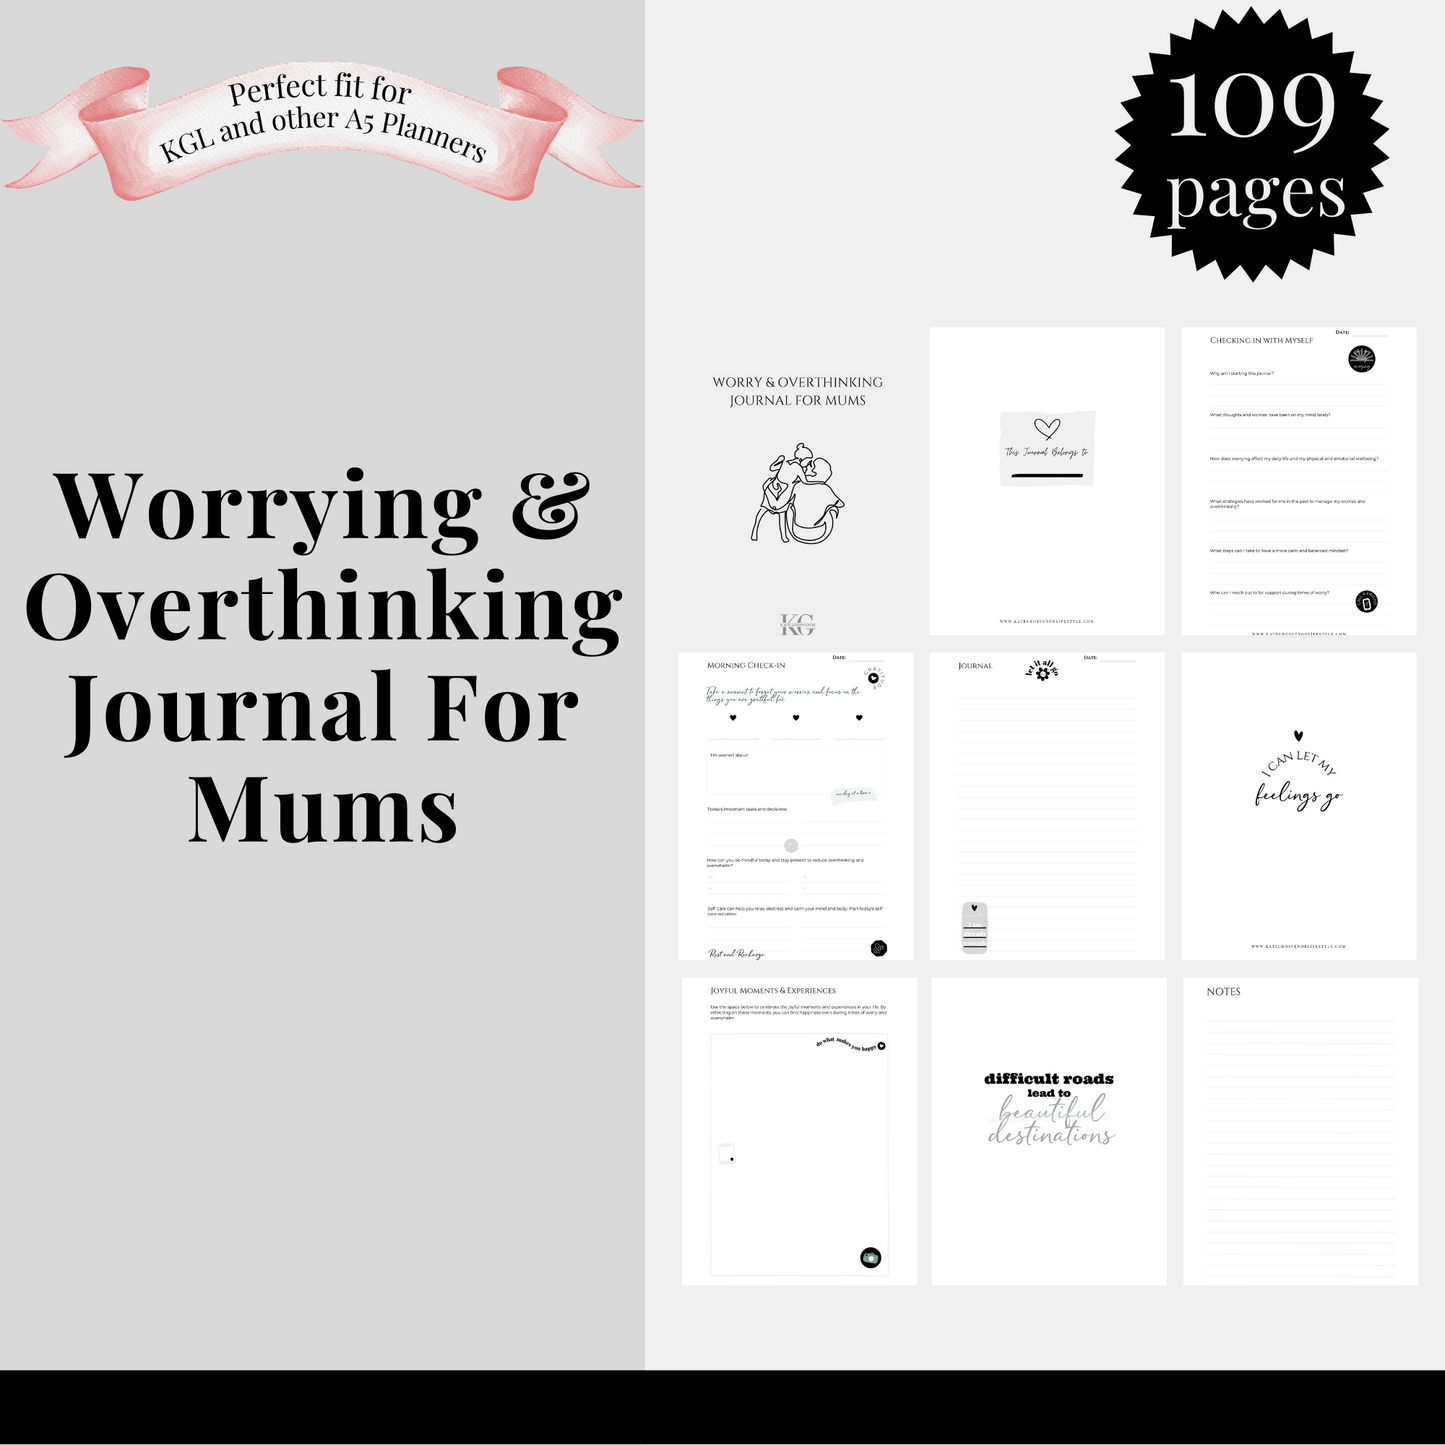 Worry & Overthinking Journal for Mums